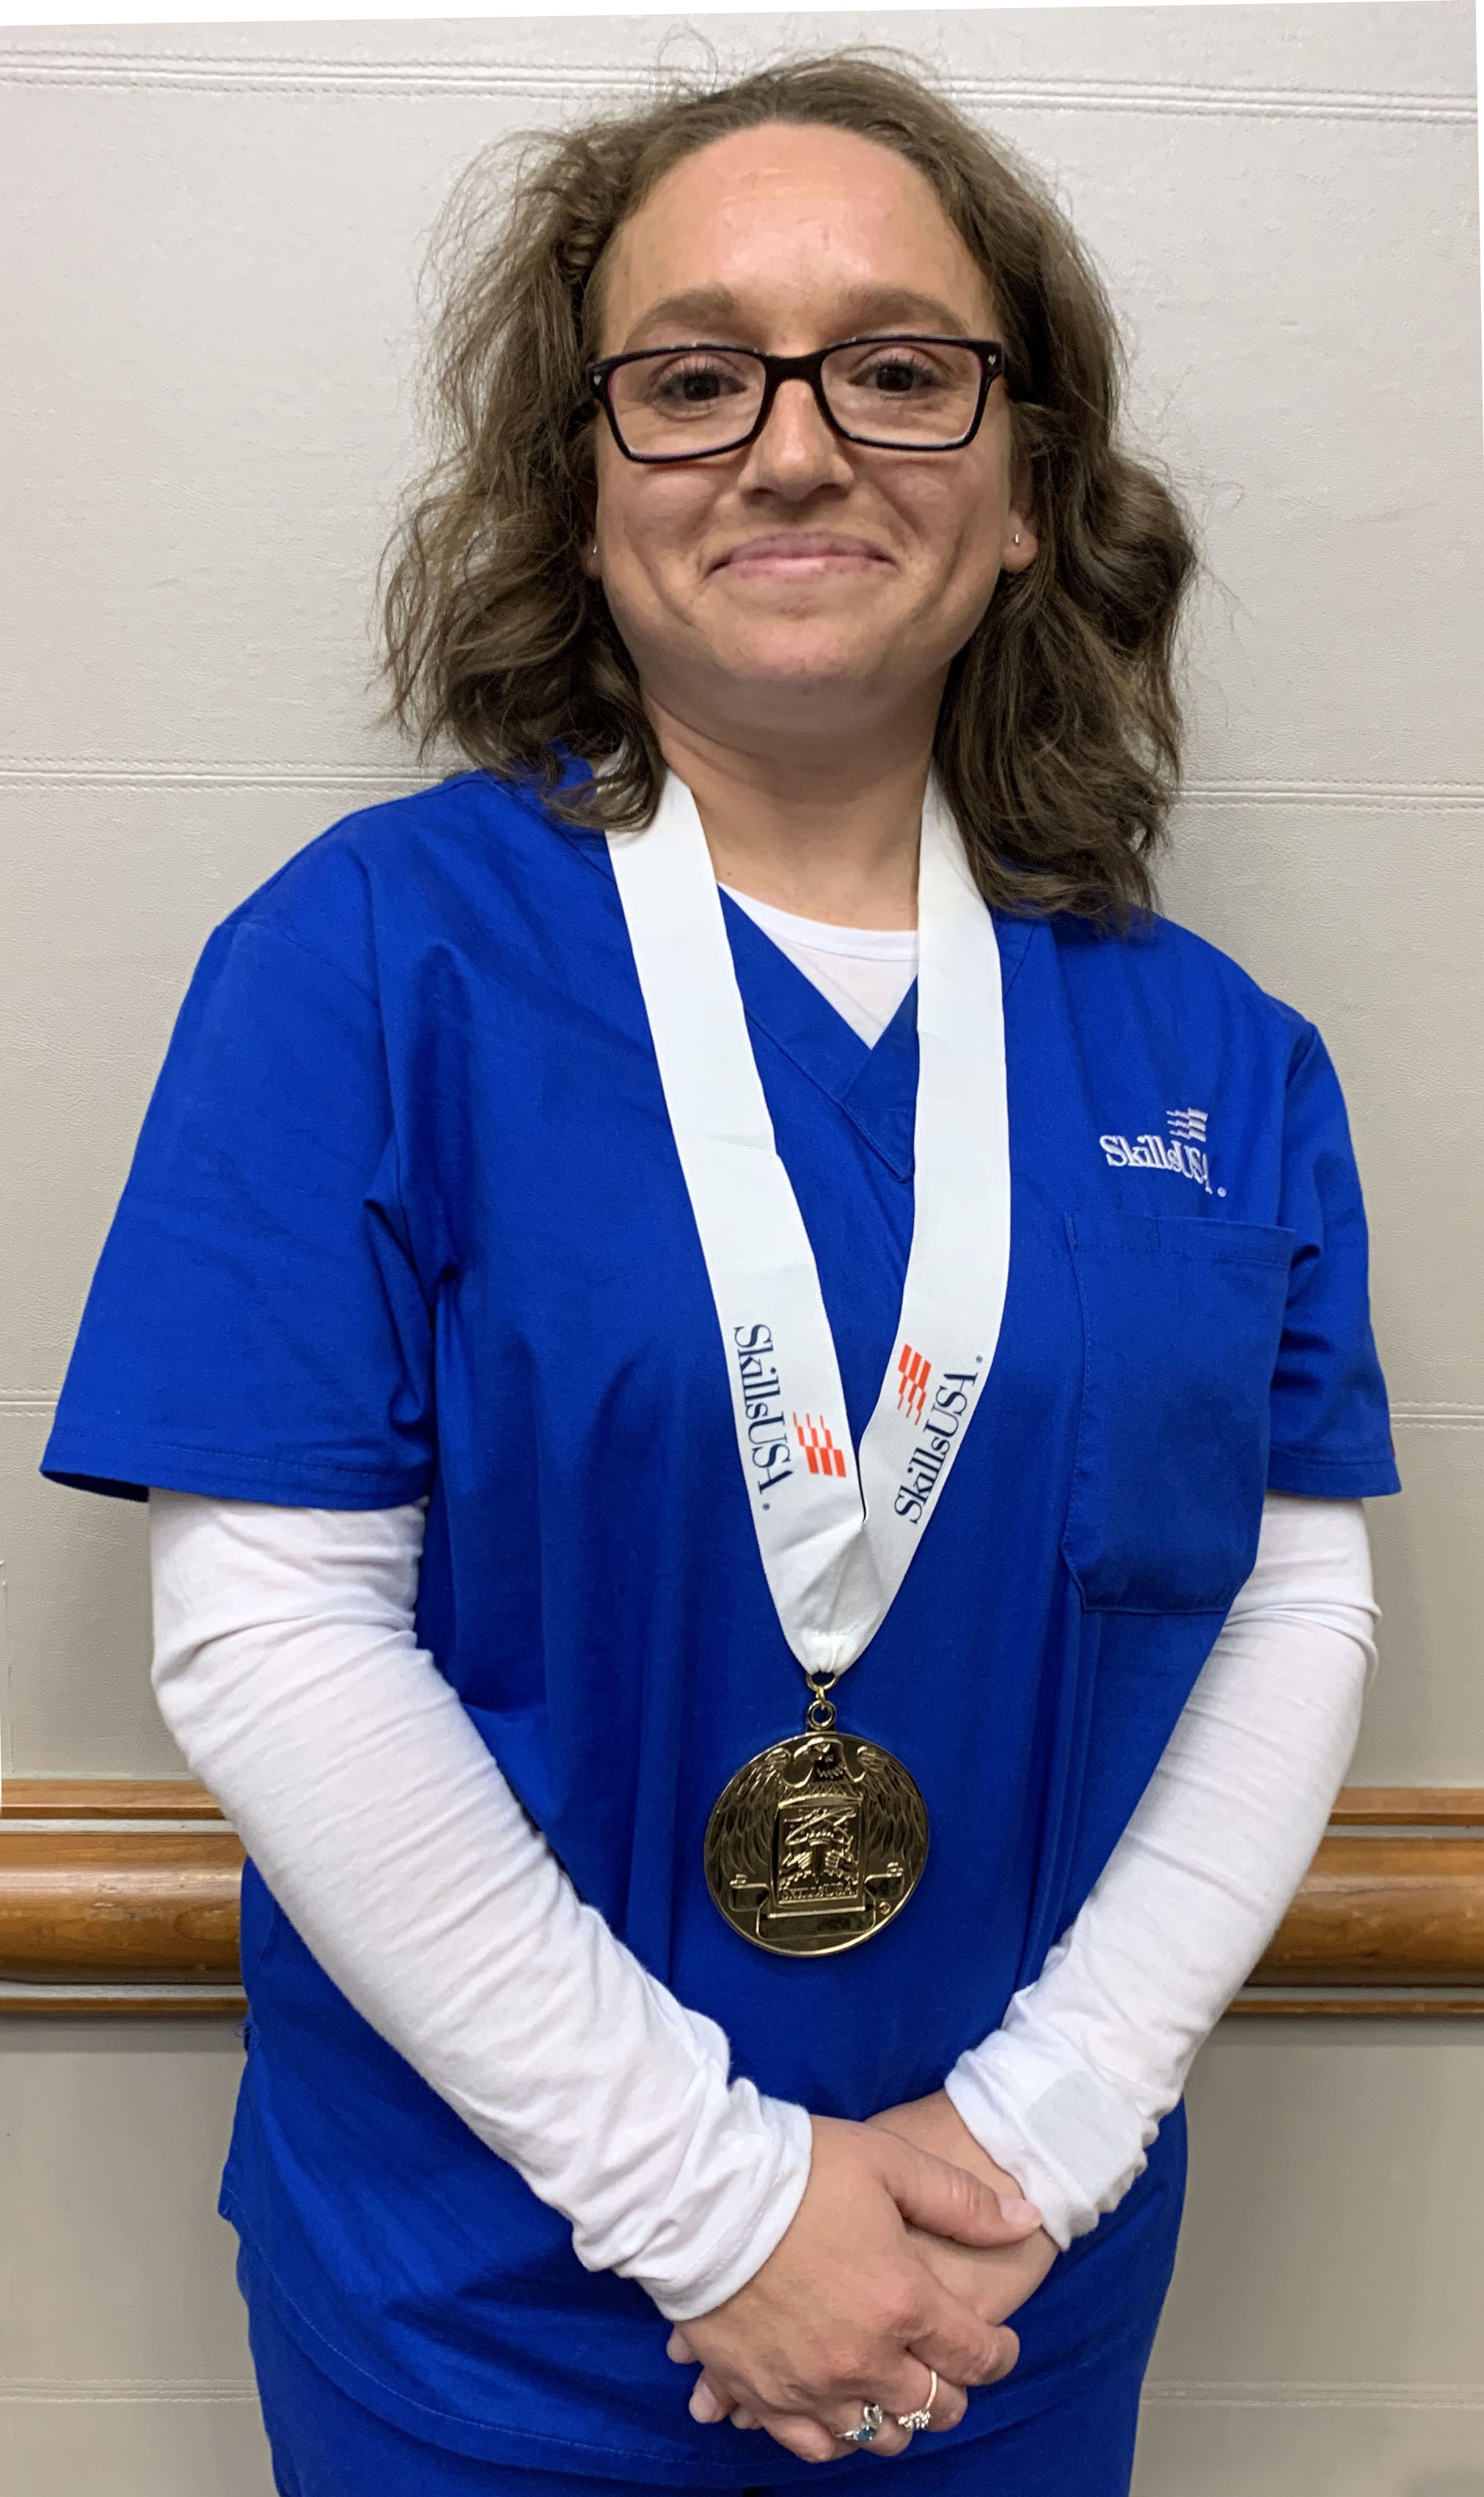 GNTC student Jacquelyn Beck received the gold medal in Medical Assisting.